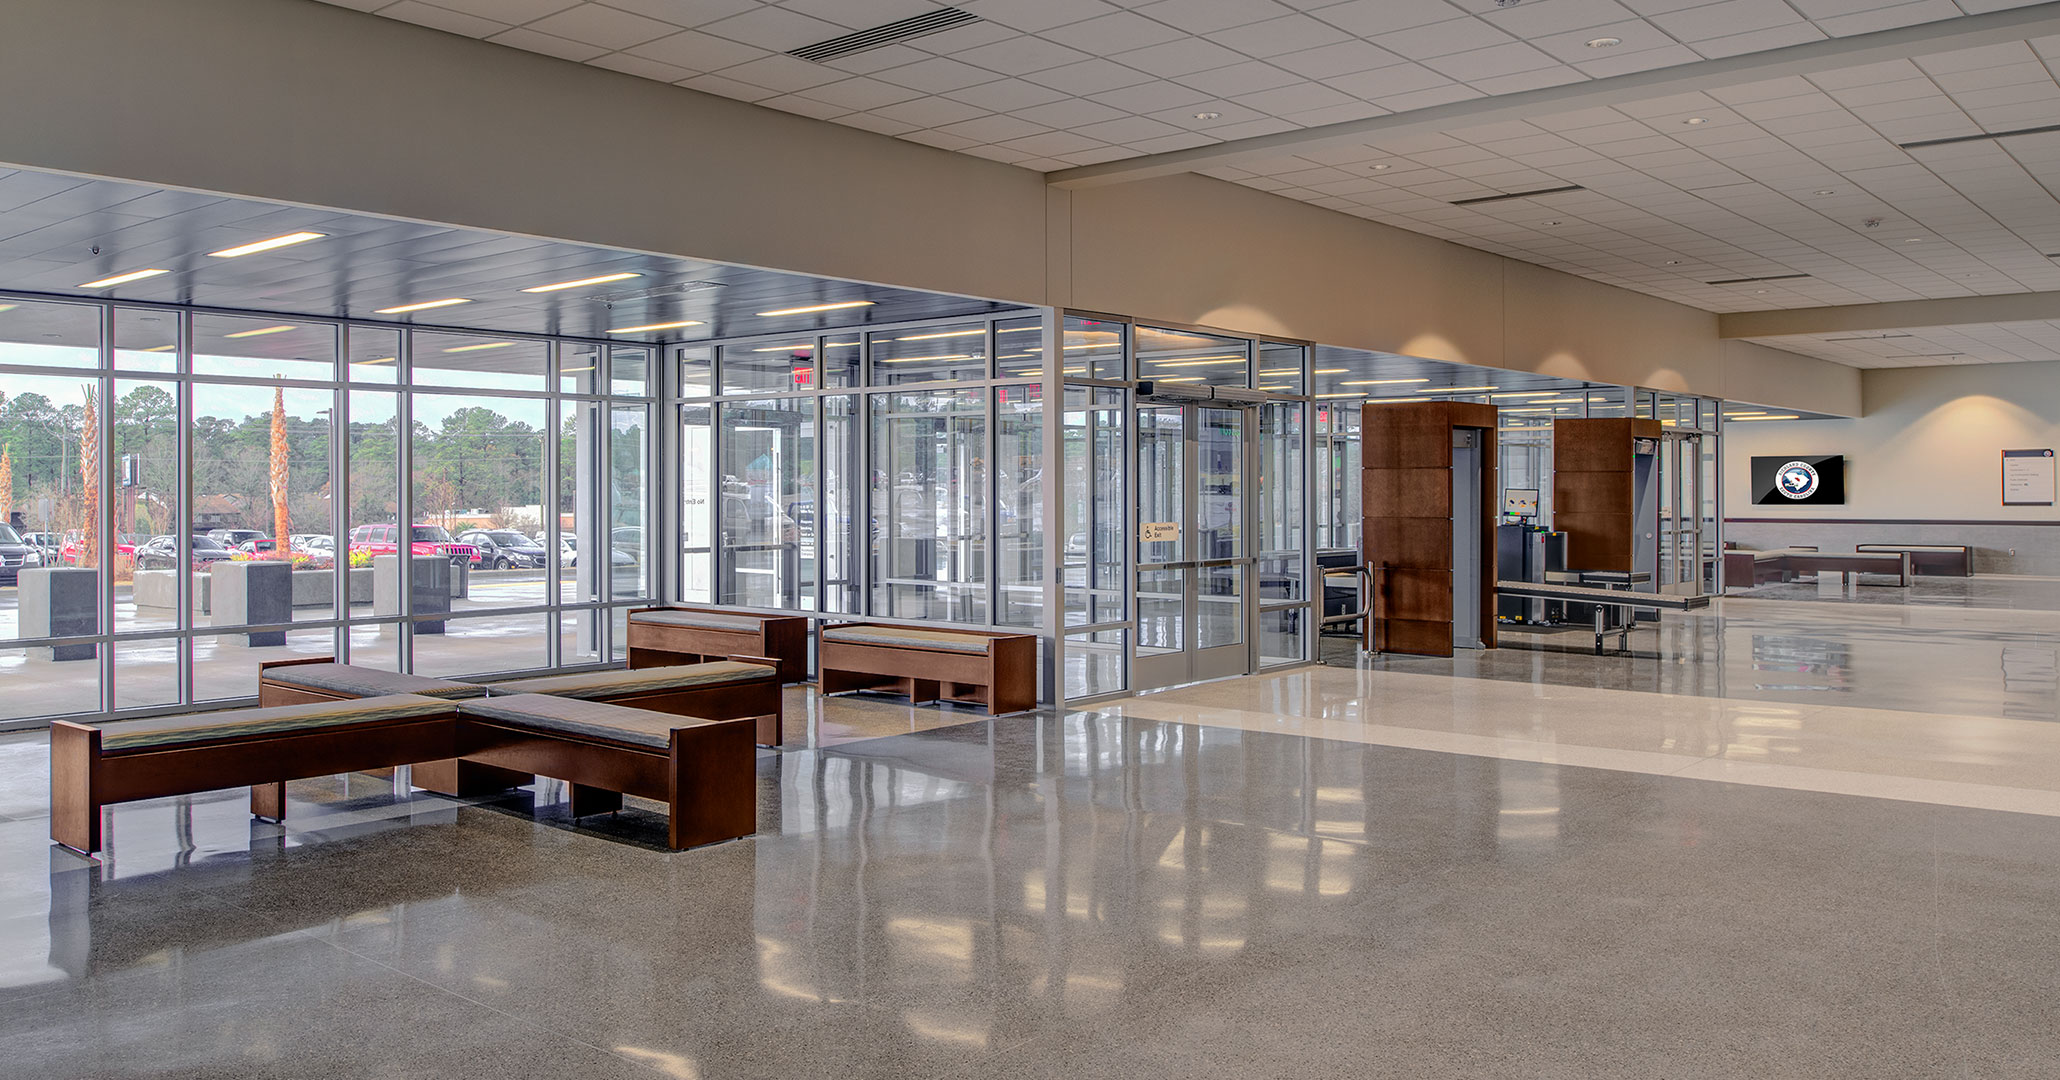 Richland County worked with Boudreaux architects to design a modern courthouse.